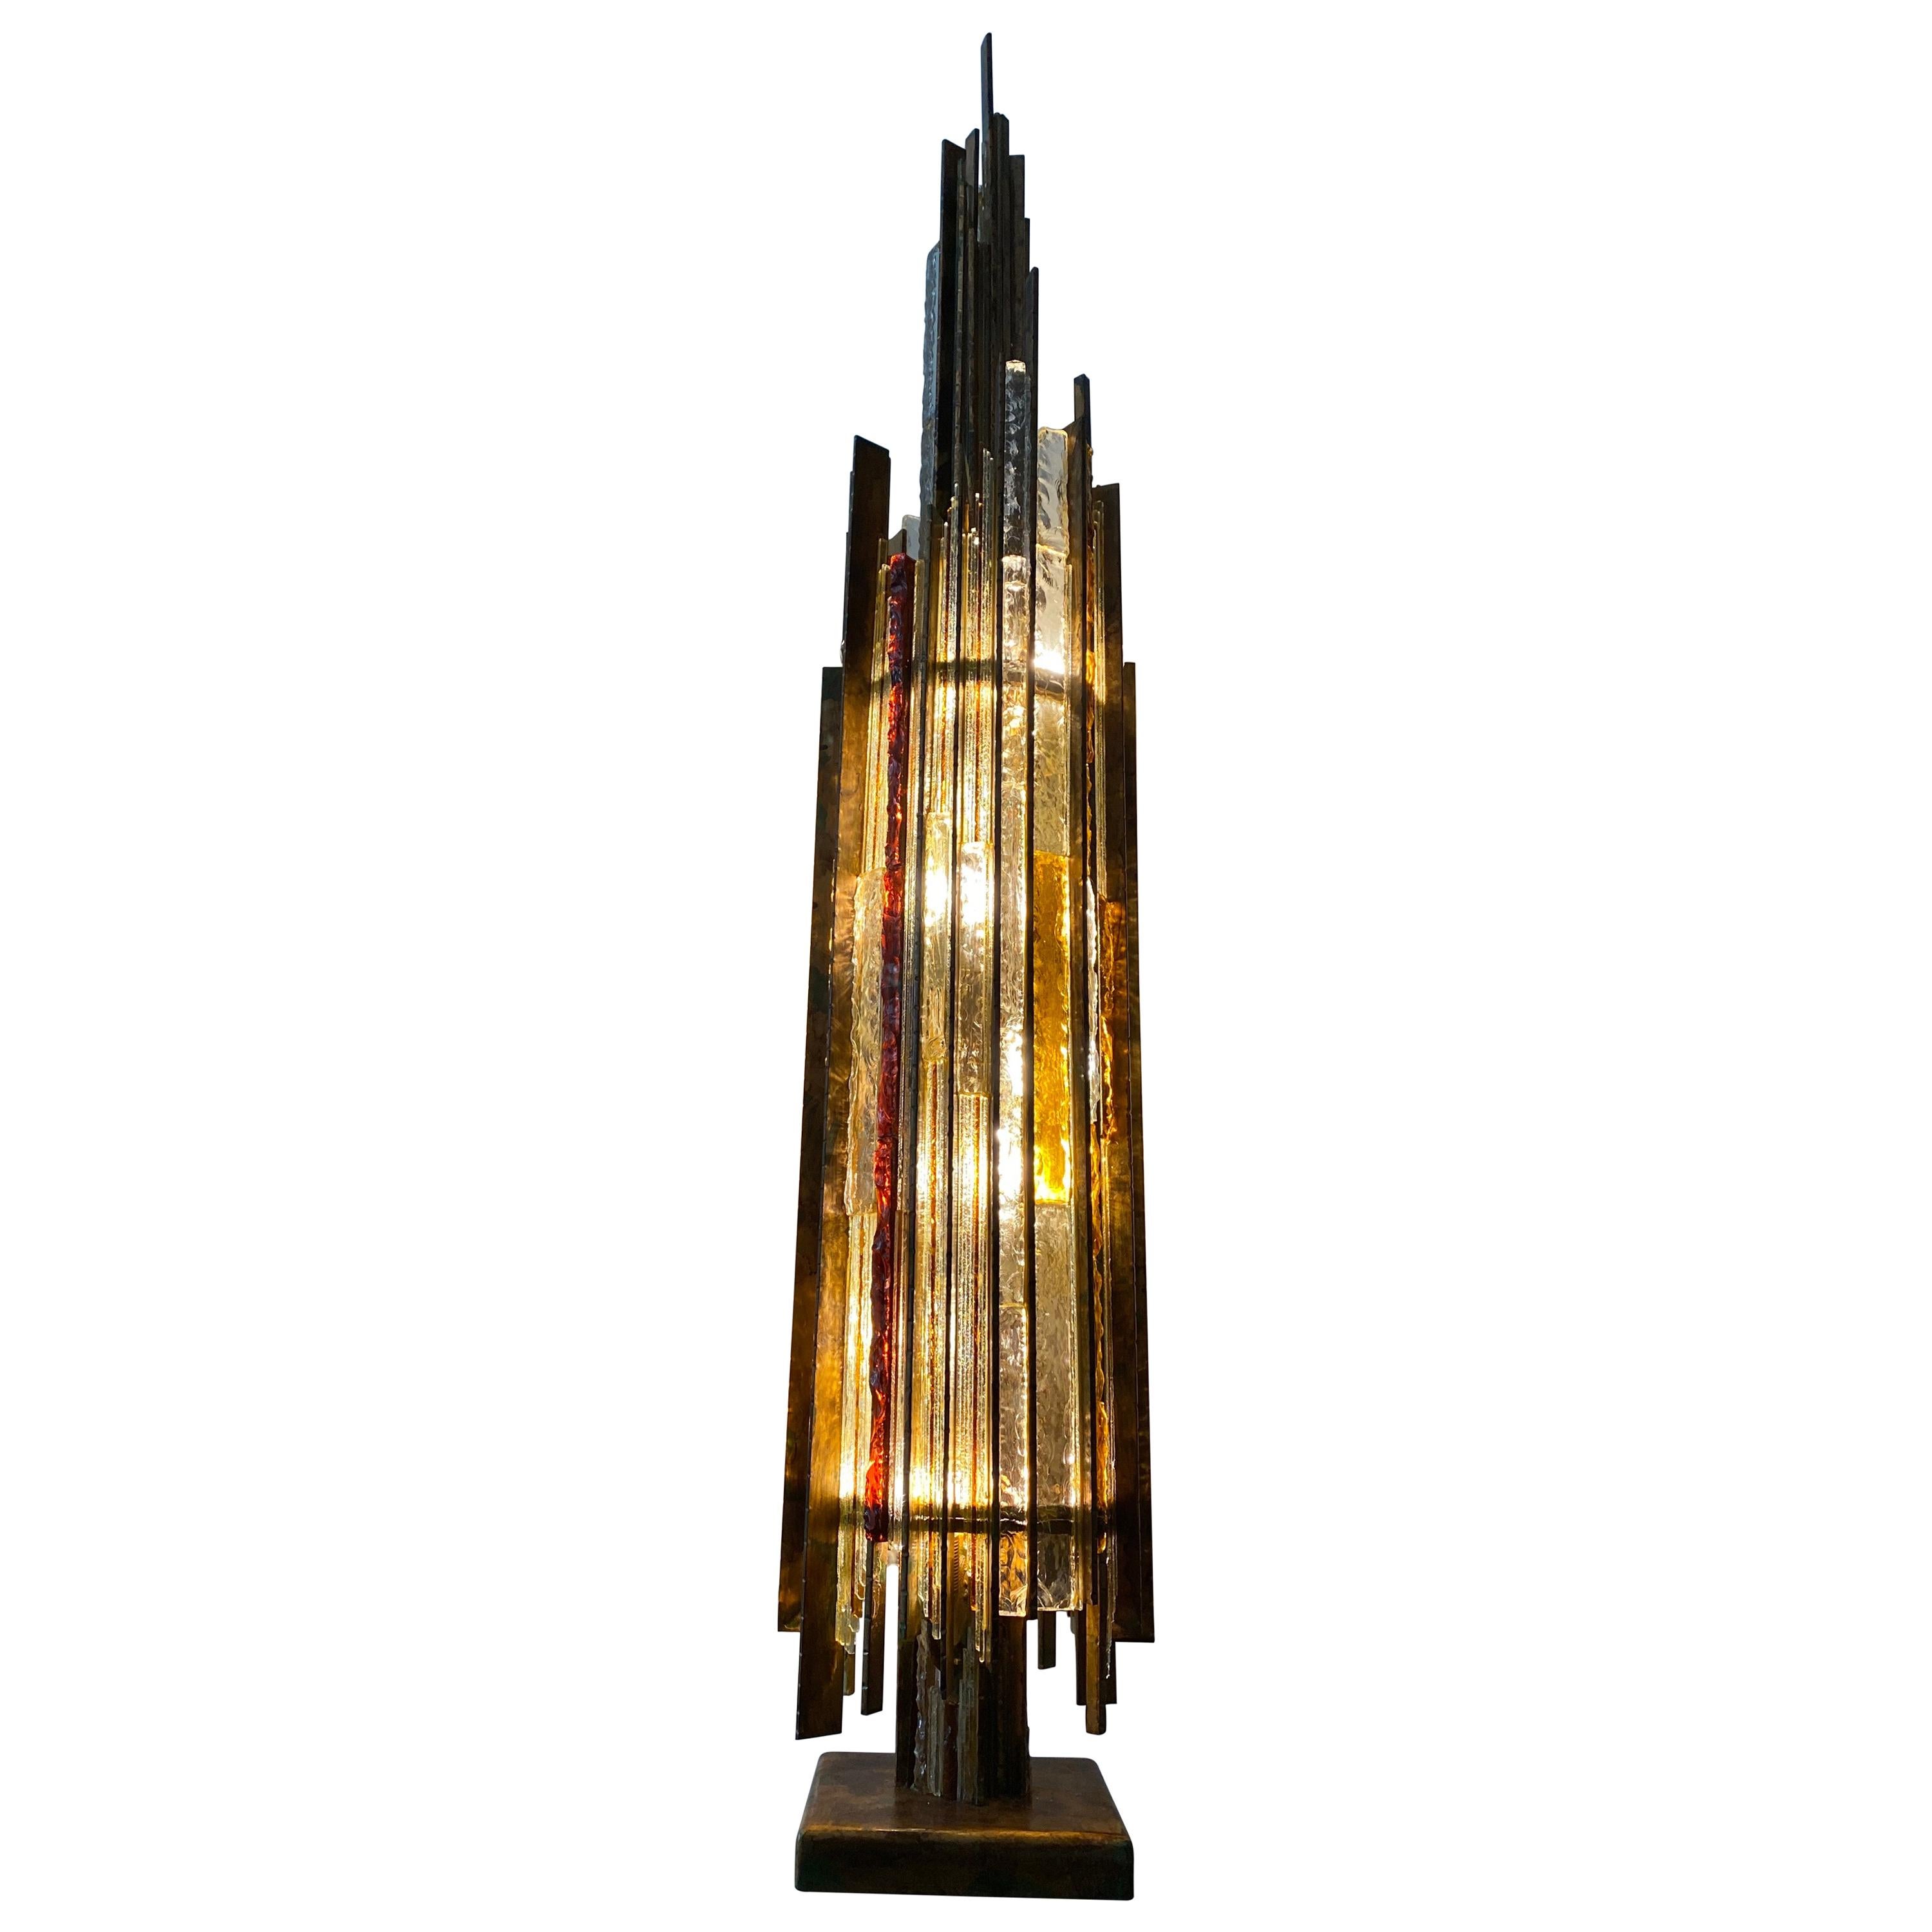 Poliarte Brutalist Bronze and Glass Life-Size Floor Lamp, 1970s by Albano Poli